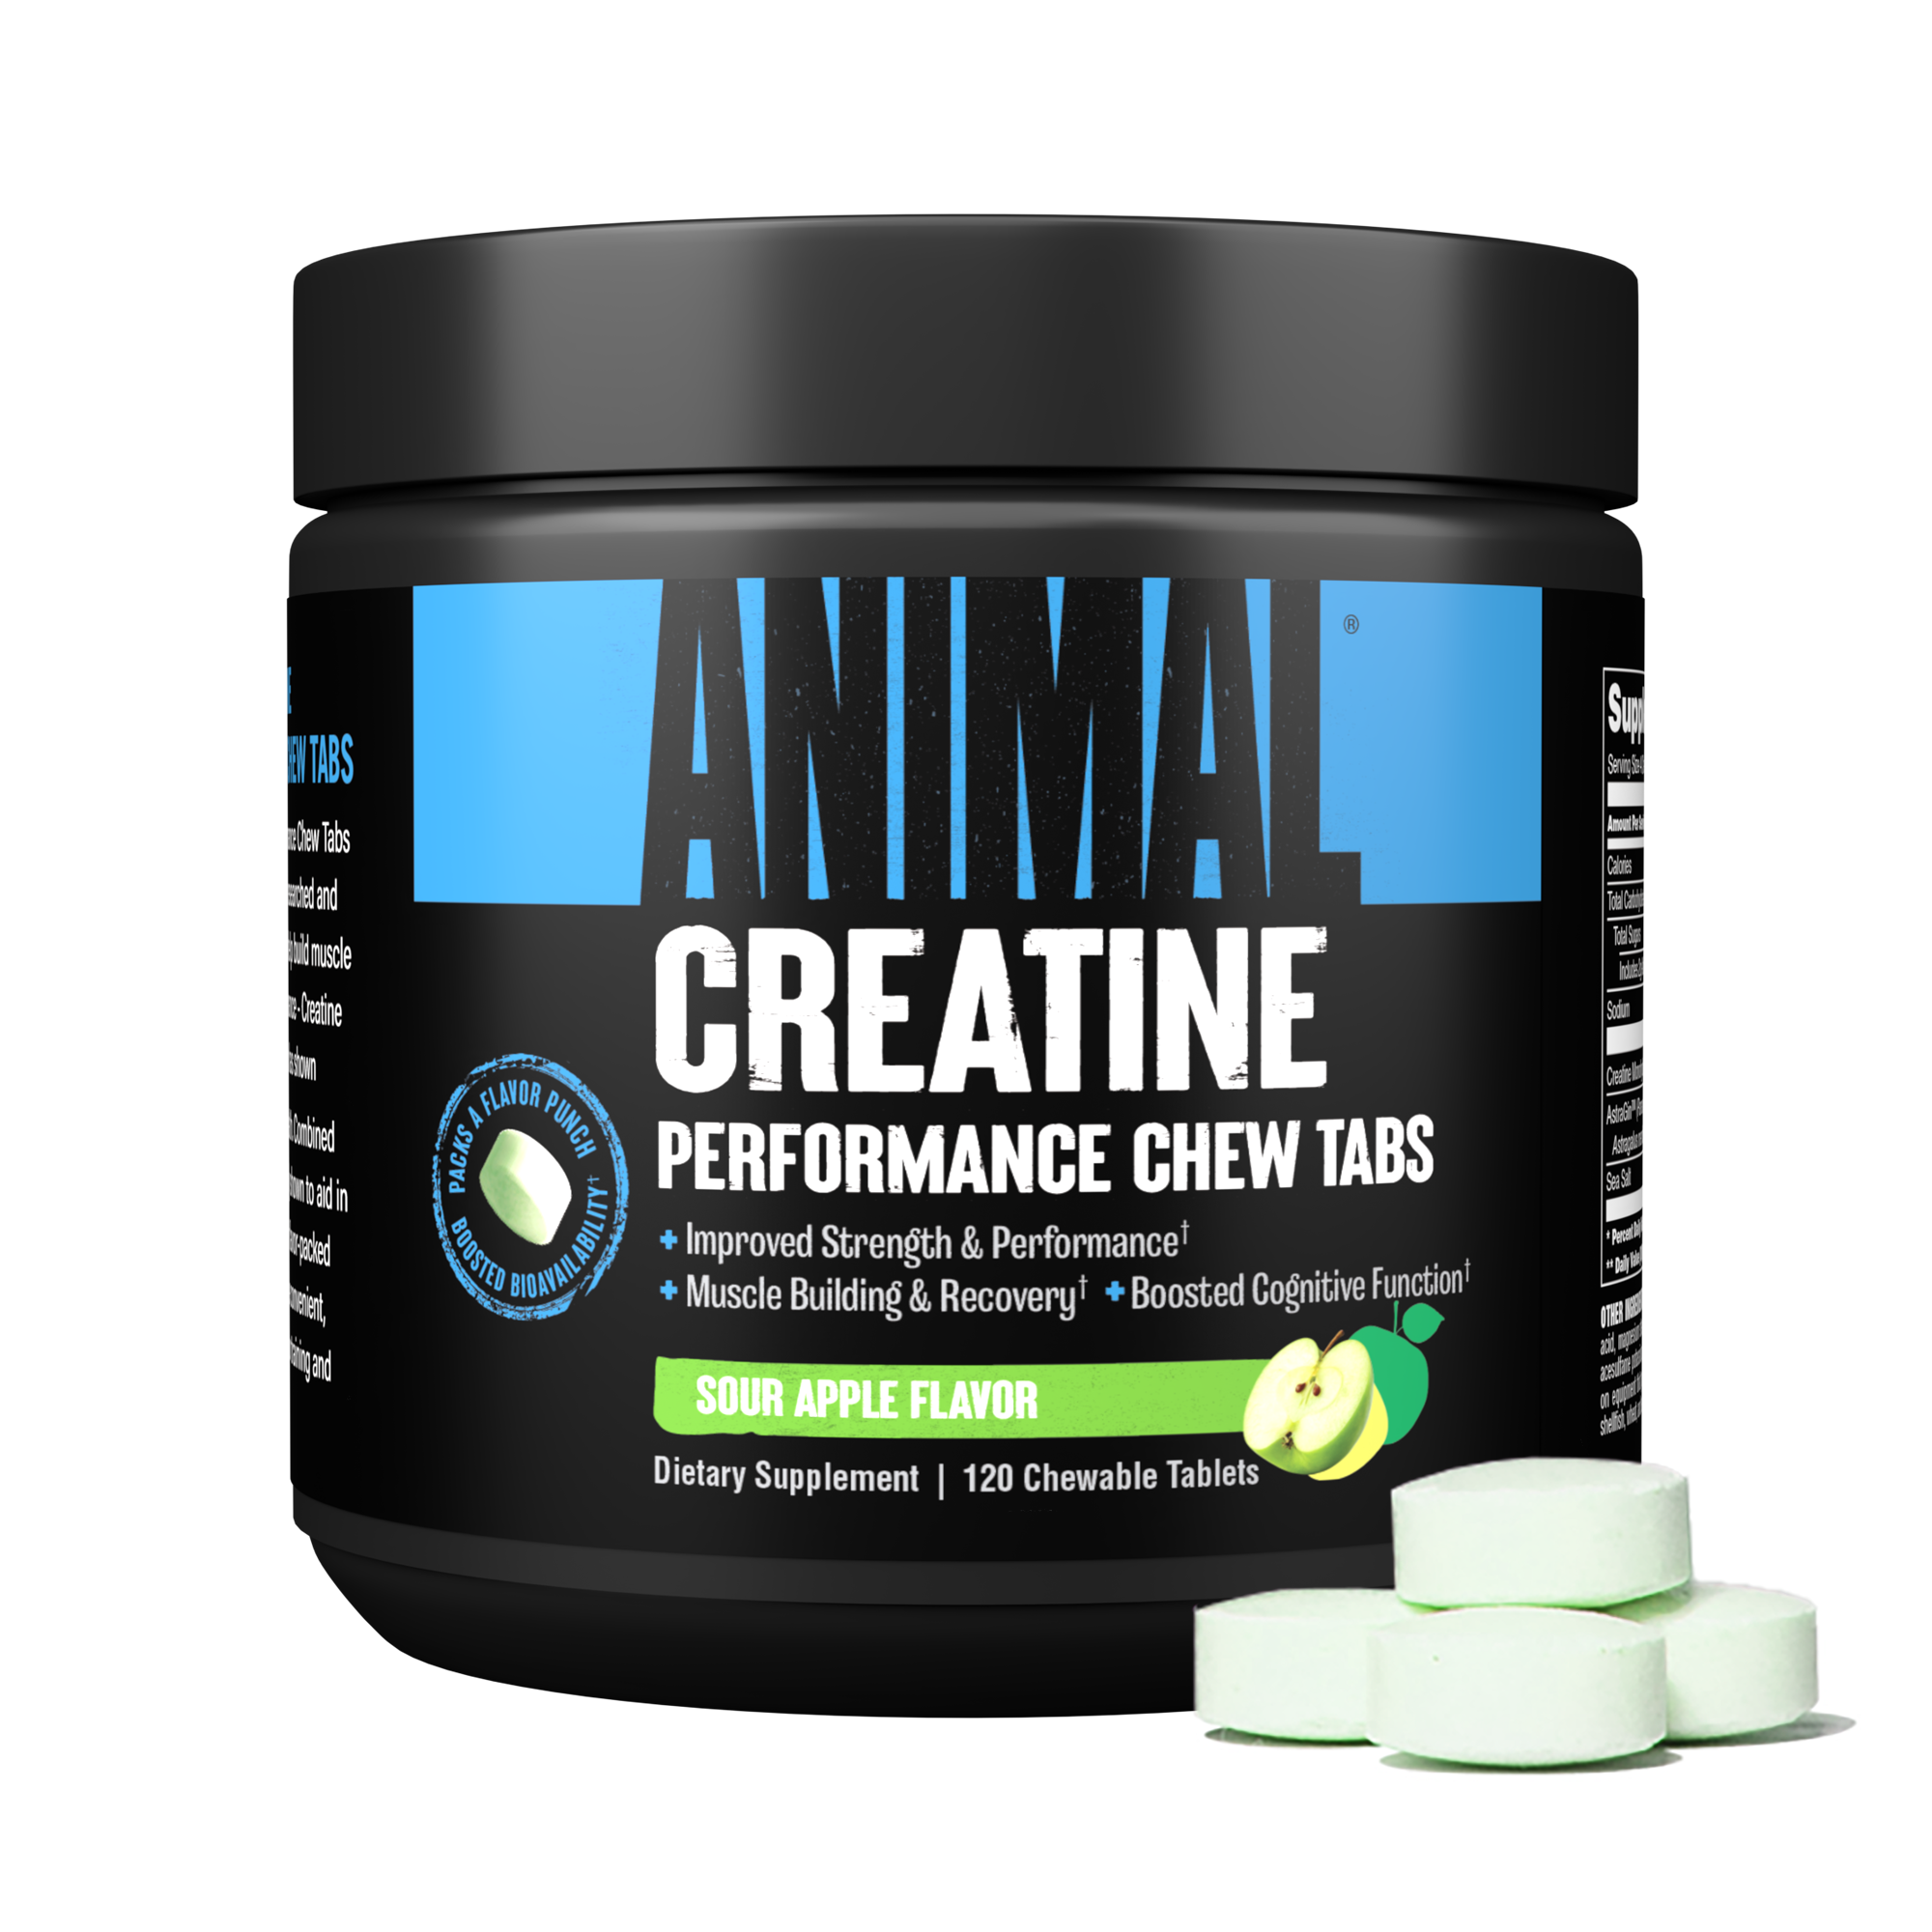 Animal Creatine Chews - A1 Supplements Store